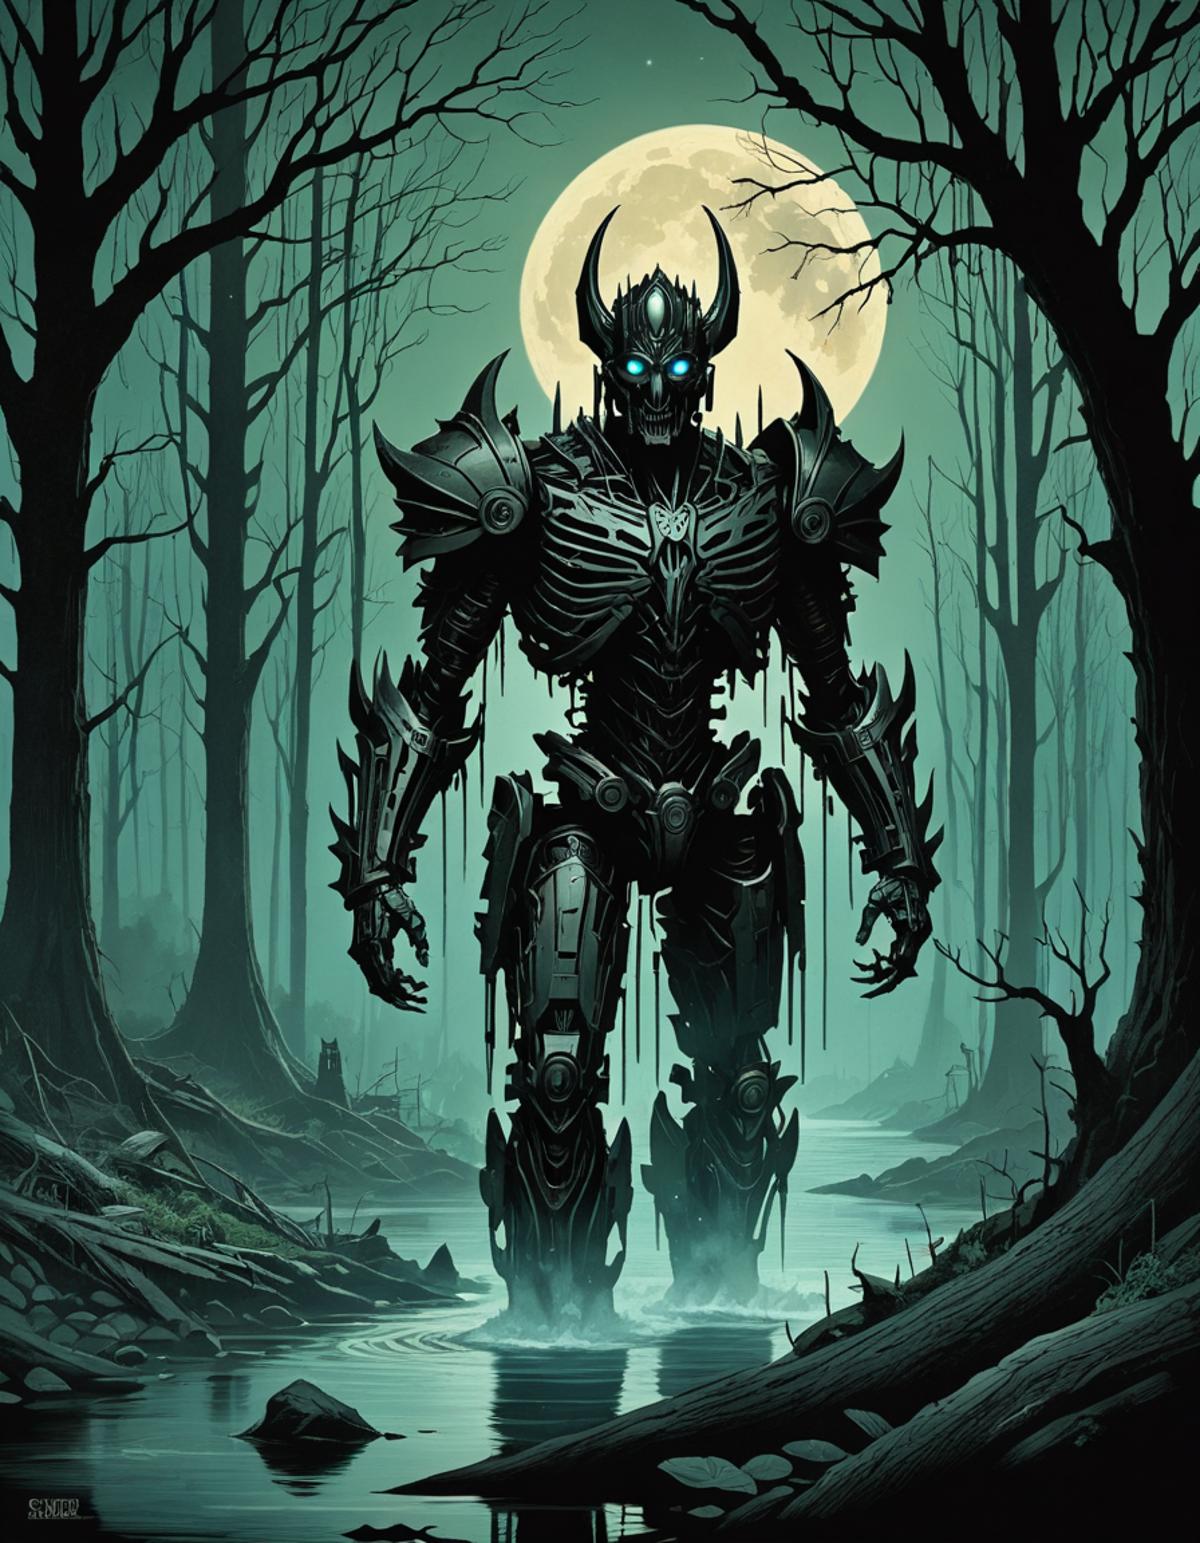 The image features a robot with a moon in the background, standing in a forest.